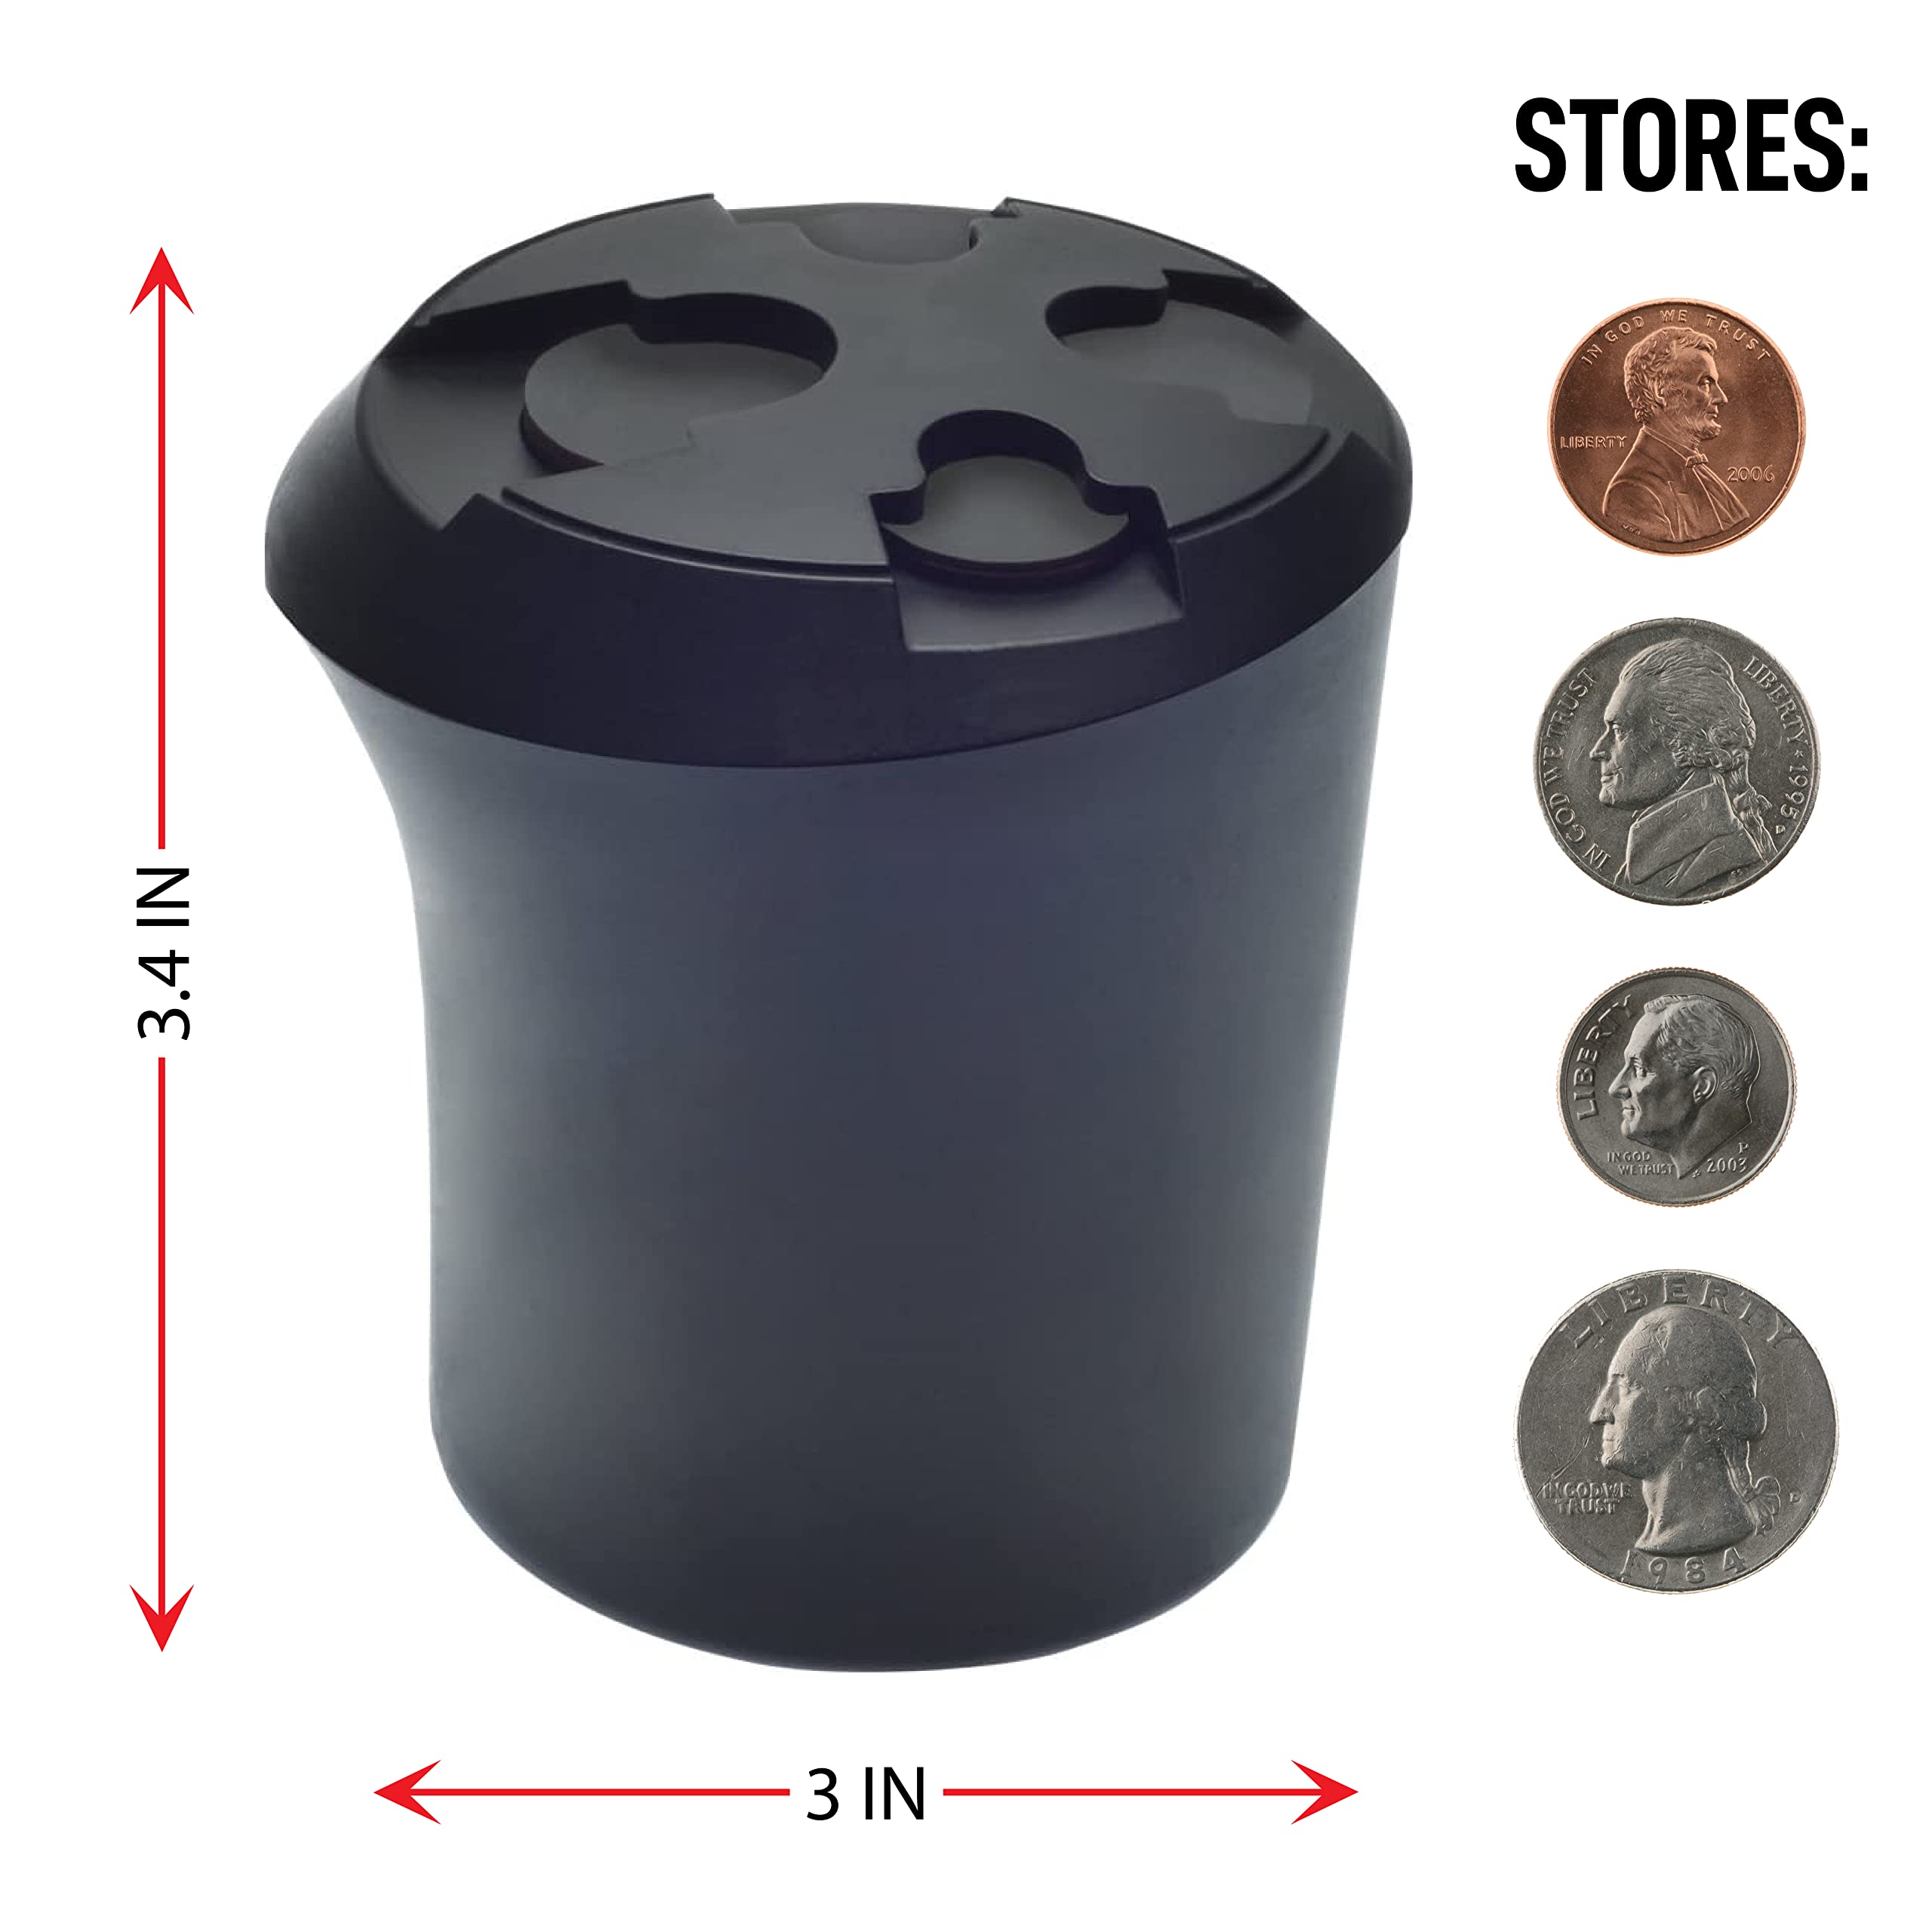 Nadex Coin Organizer Pro - Buy Car Cup Coin Holder and Sorter